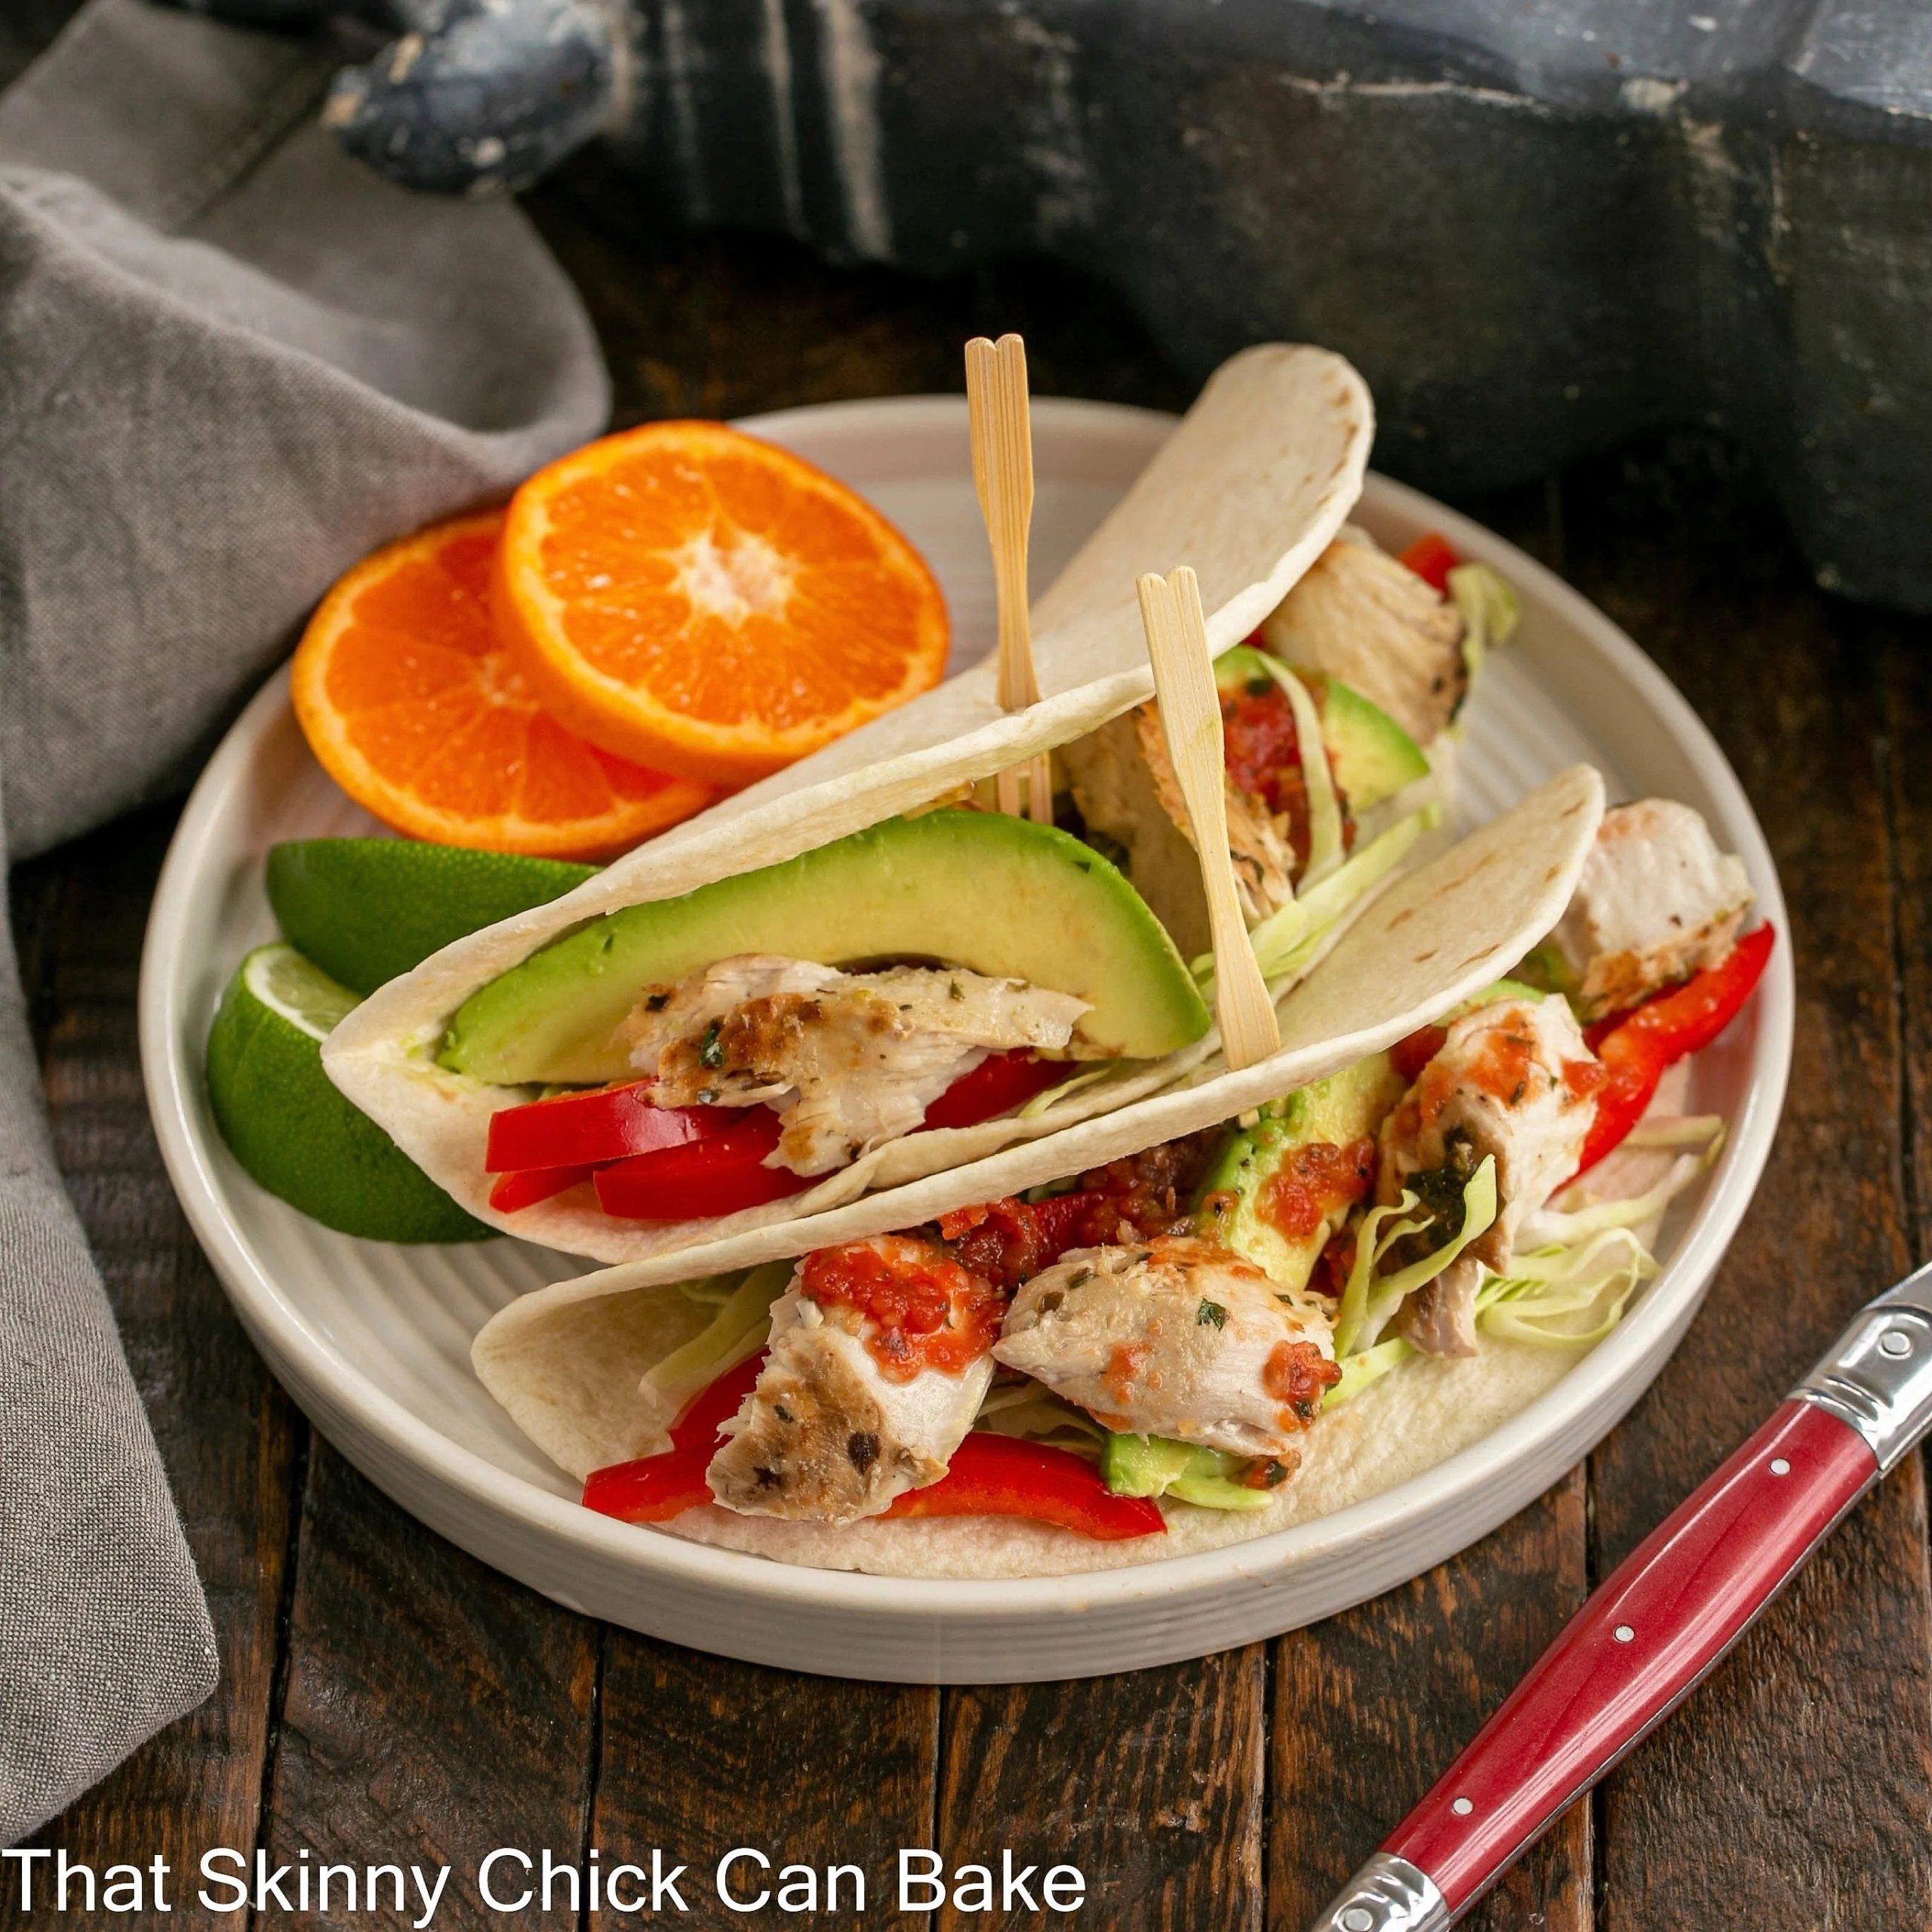 Grilled Fish Tacos - Healthy & Delicious! - That Skinny Chick Can Bake